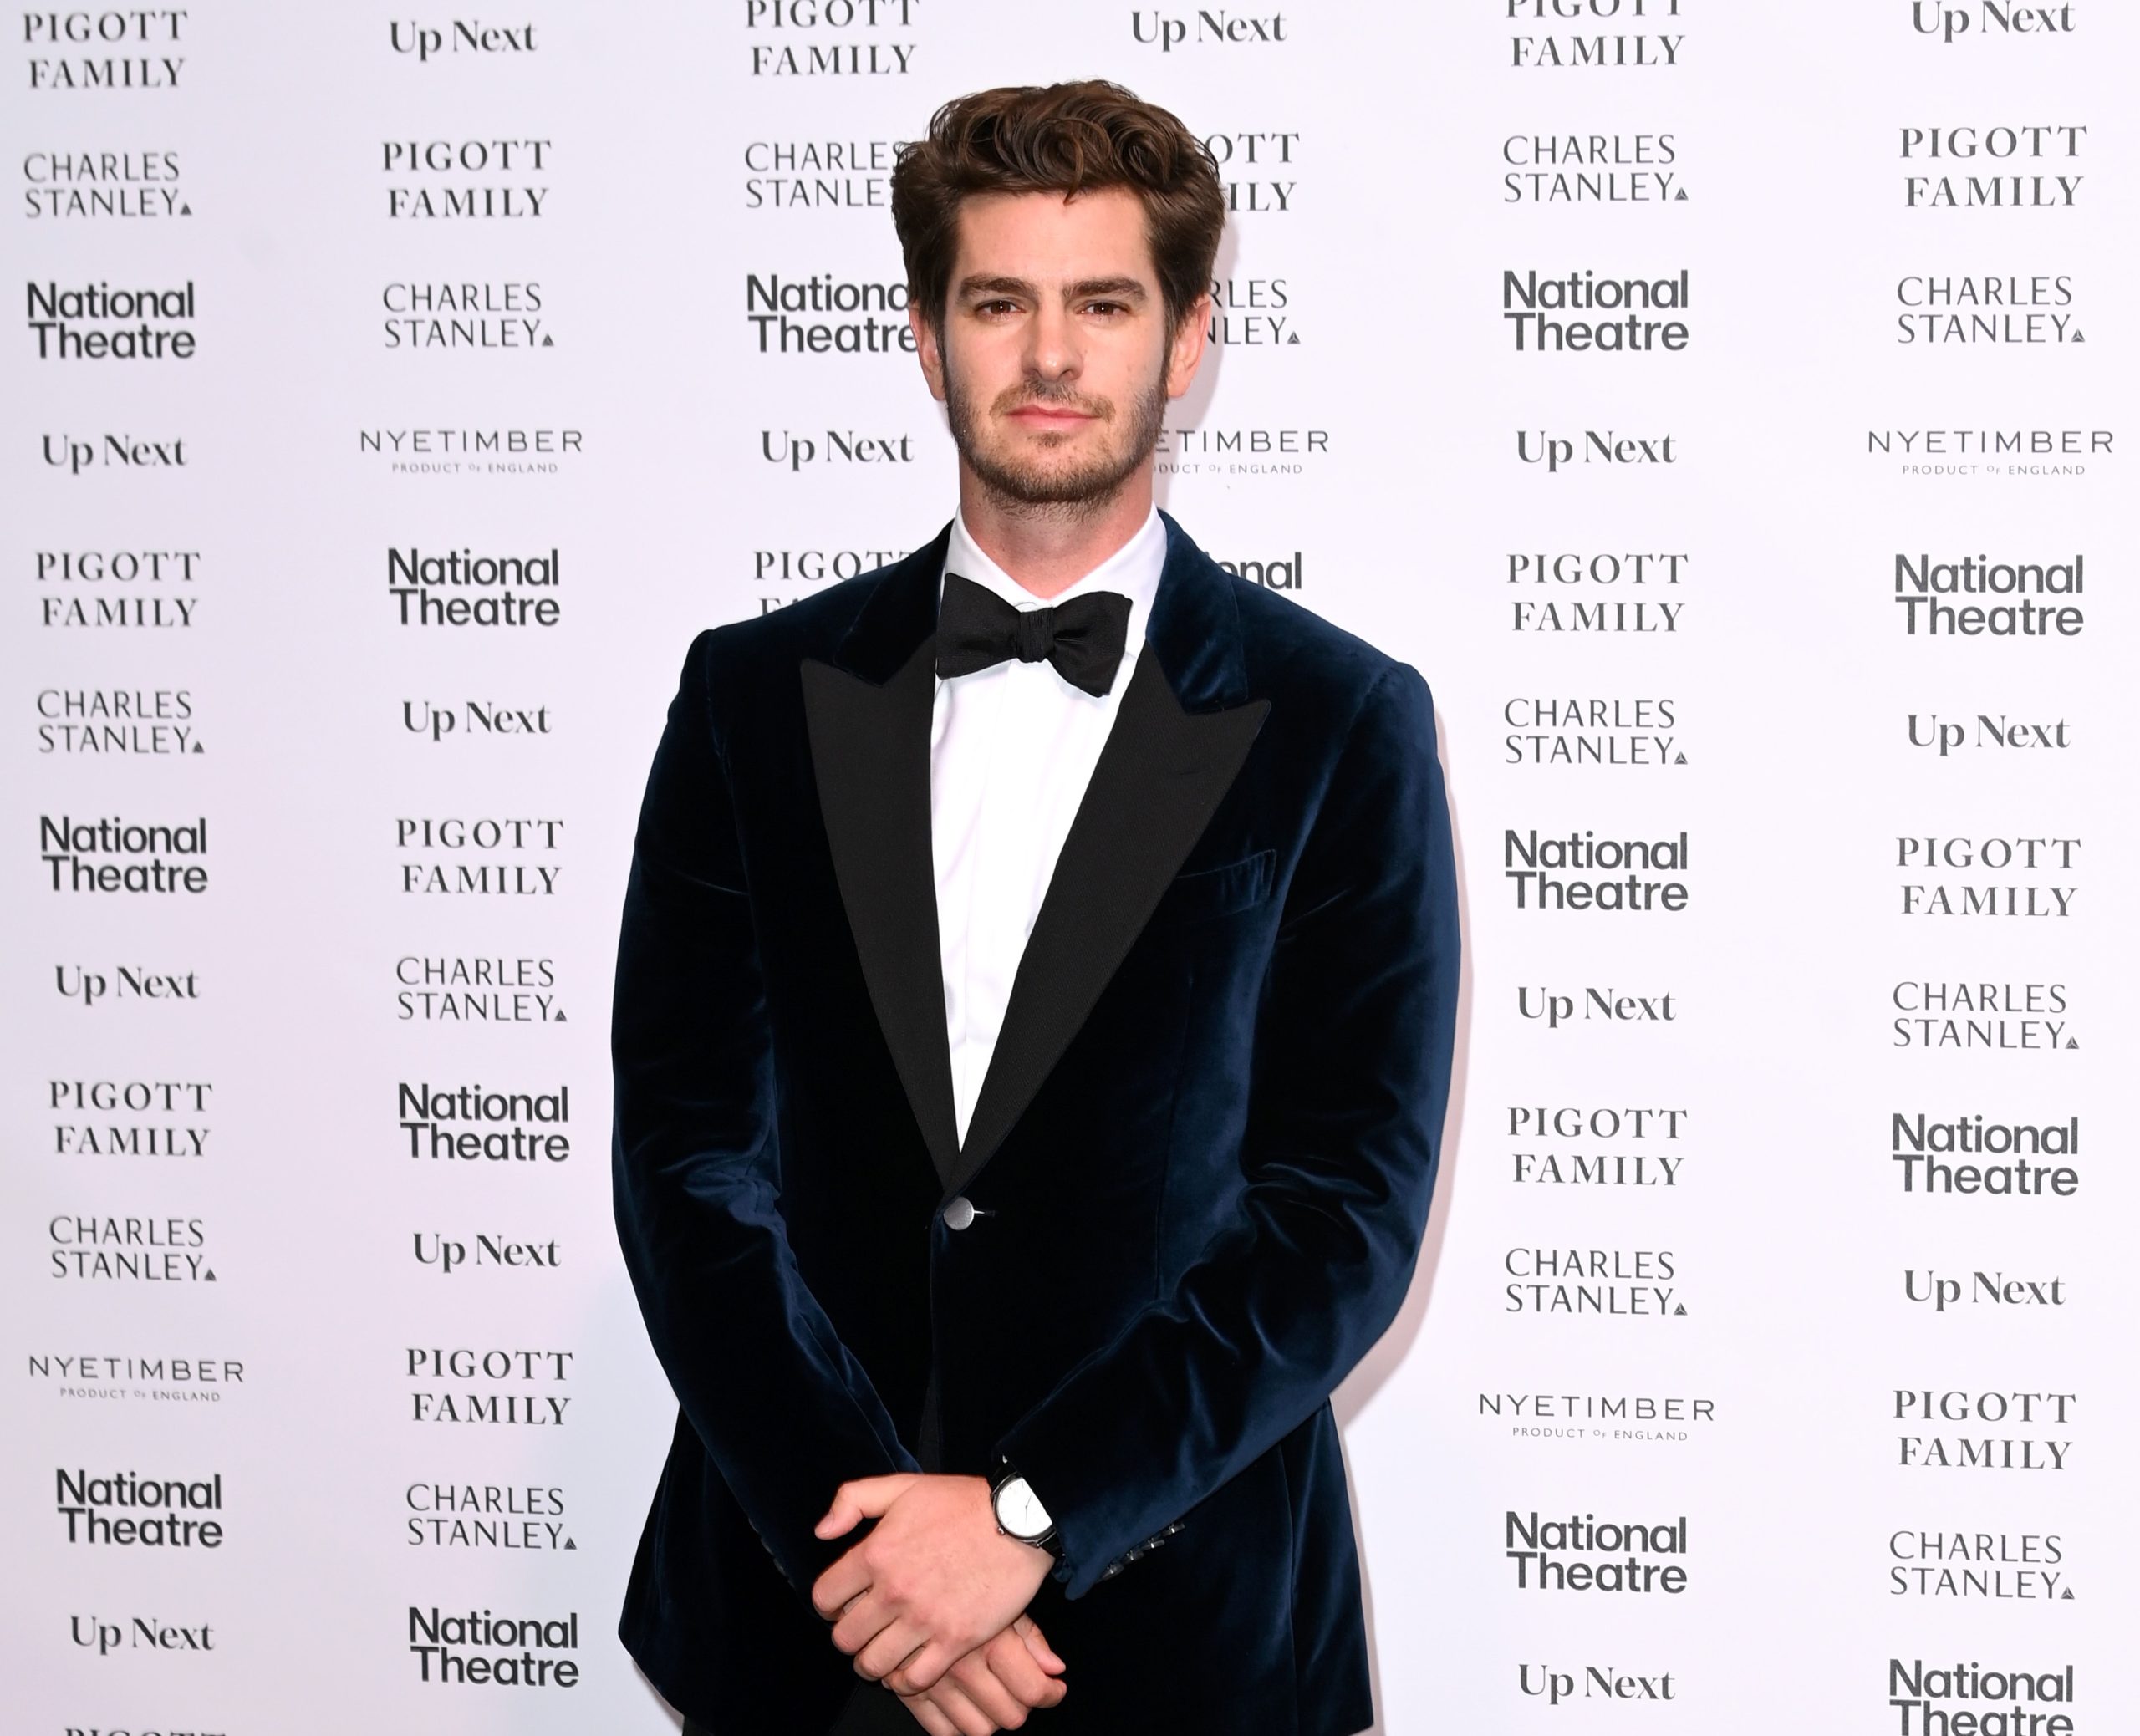 Andrew Garfield’s Dashing Dunhill Look Steals the Show at National Theatre “Up Next” Gala